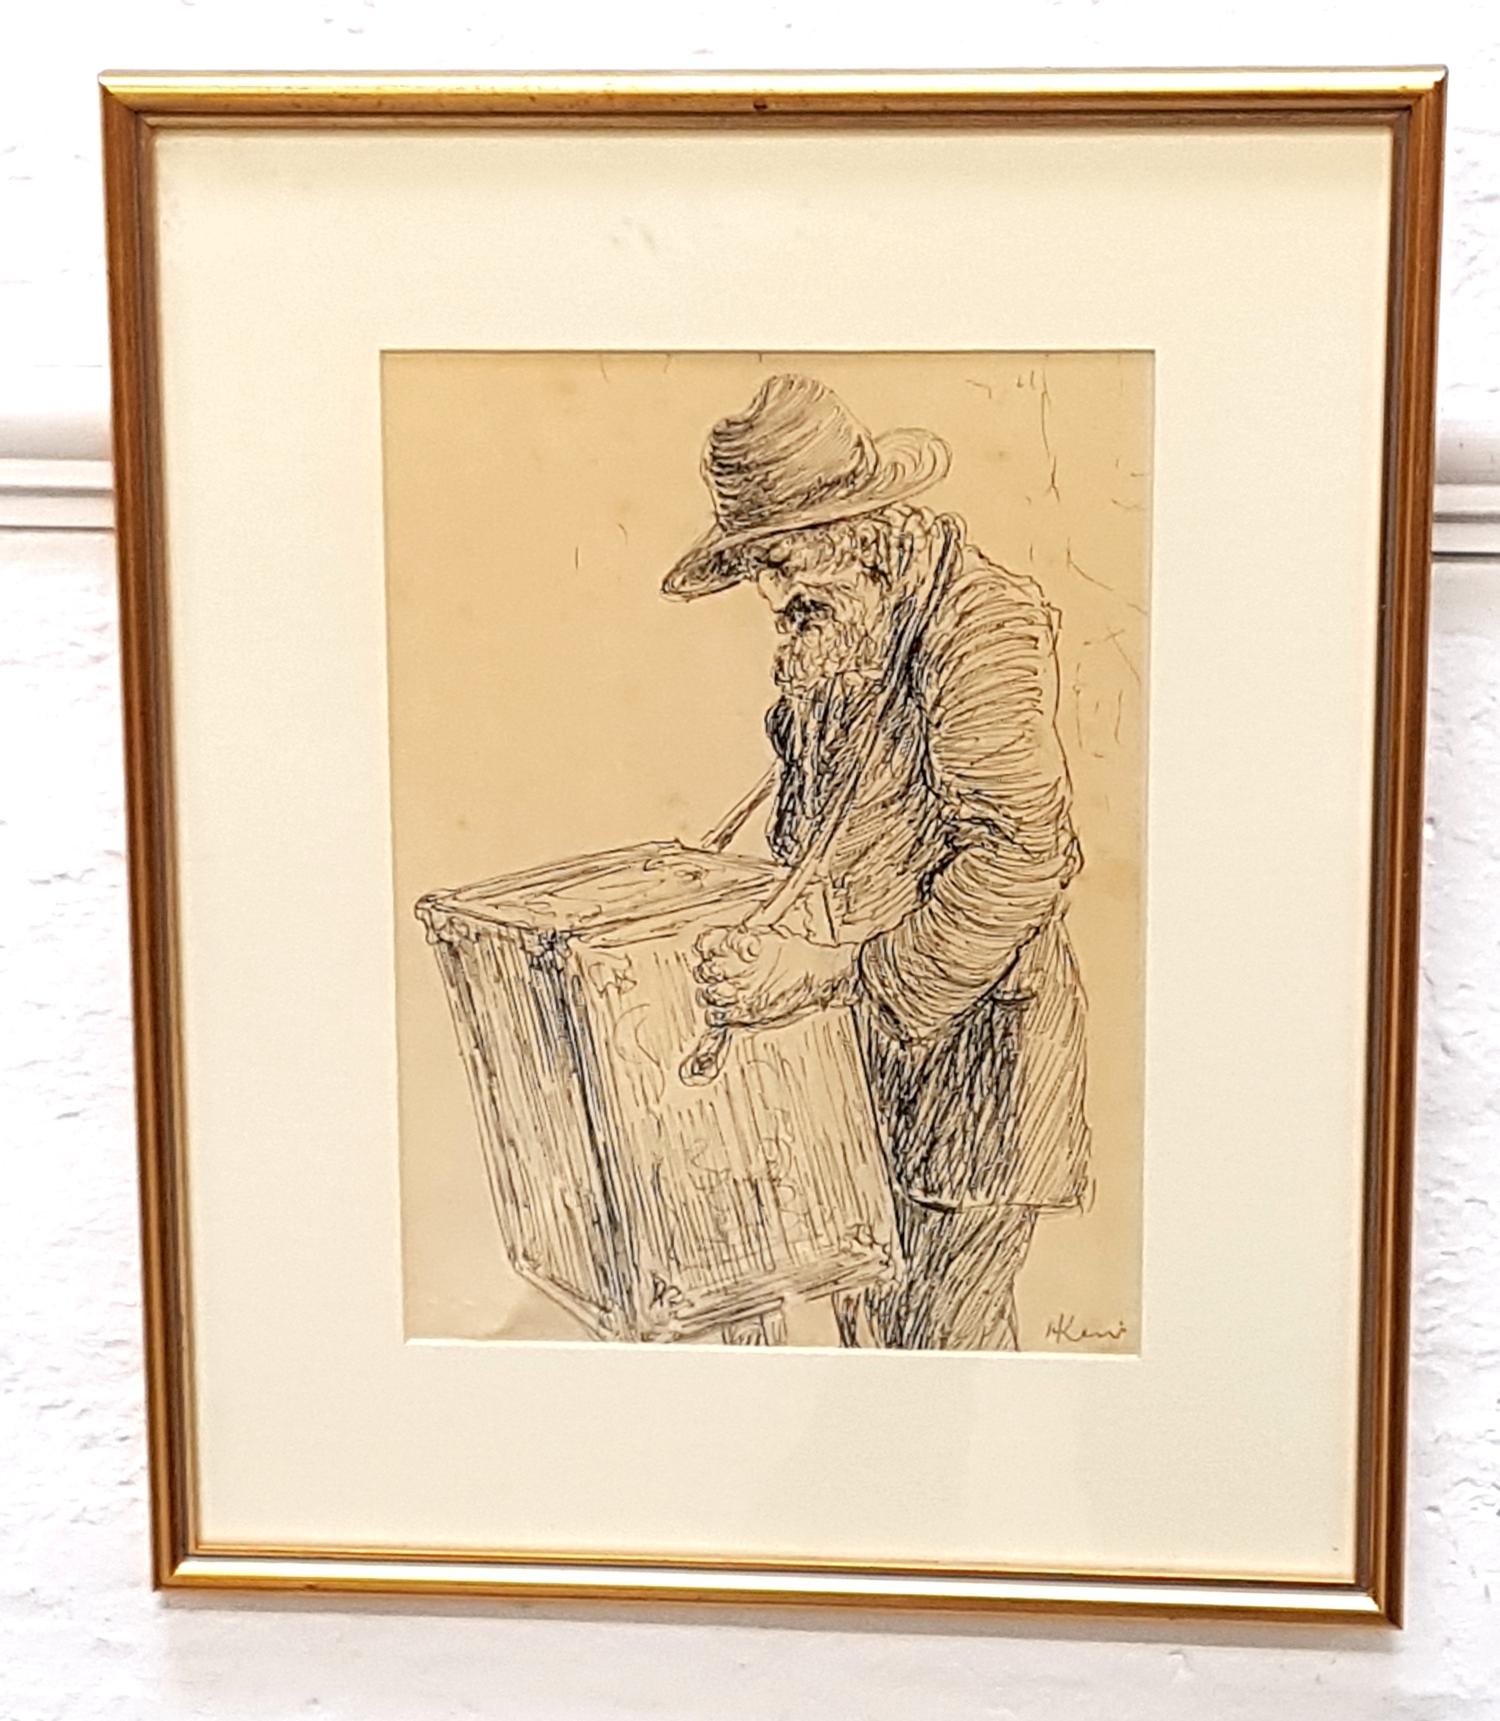 HARRY KEIR (Scottish 1902-1977) The Street Entertainer, pen and ink on paper, signed, 27.5cm x 20cm